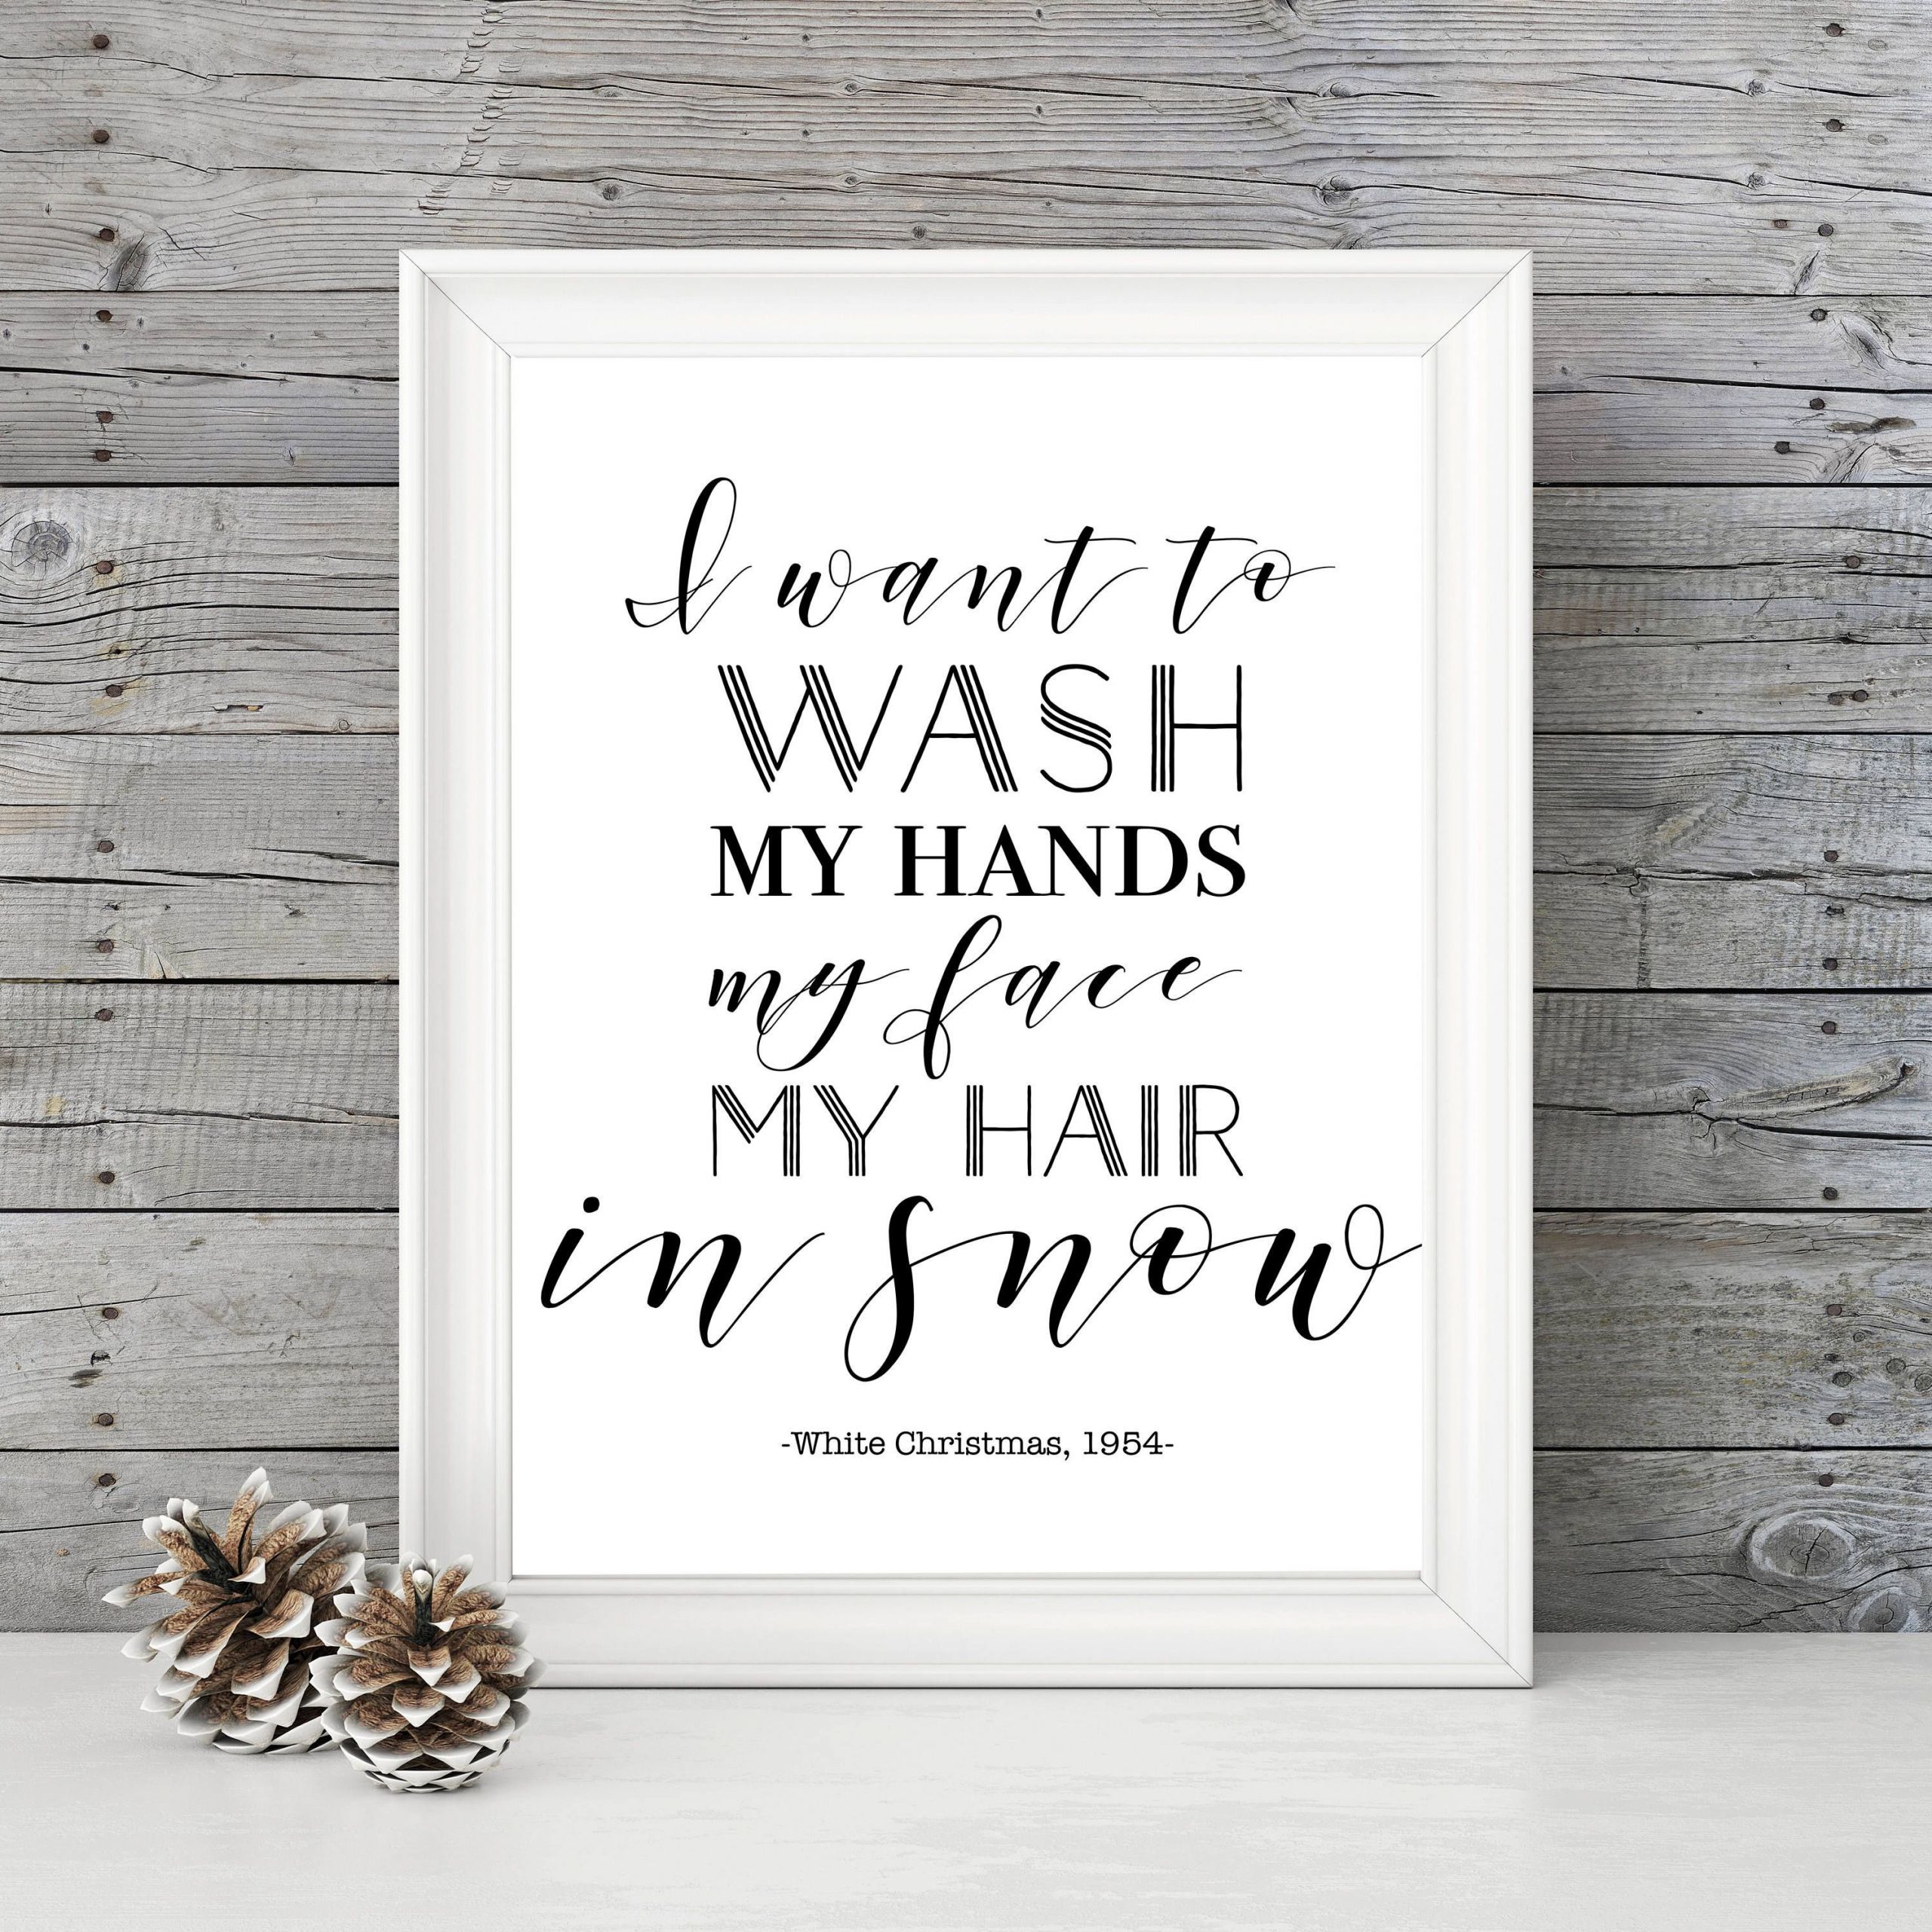 White Christmas Movie Quotes
 FOR SALE ON ETSY White Christmas Snow 11x14